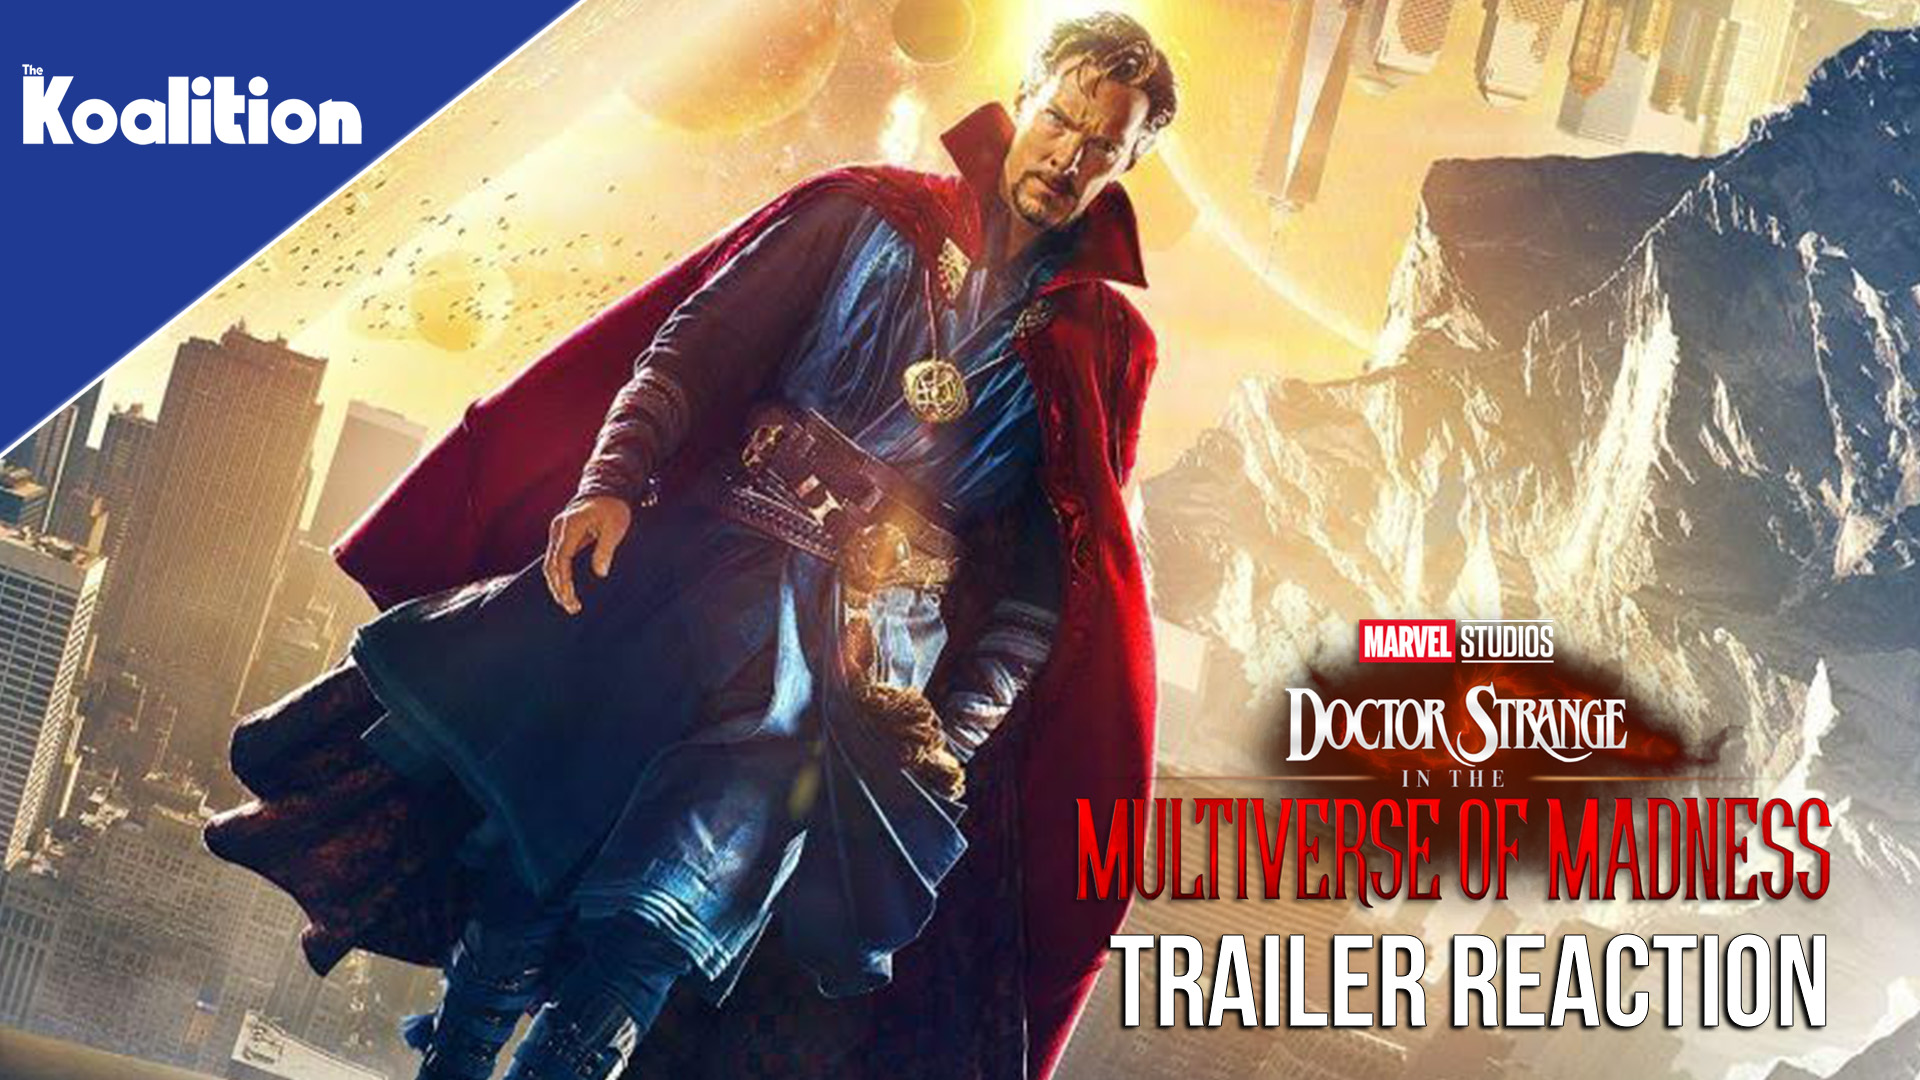 Horror Unfolds in Doctor Strange in the Multiverse of Madness Trailer, But What Does It Mean? – The Koalition